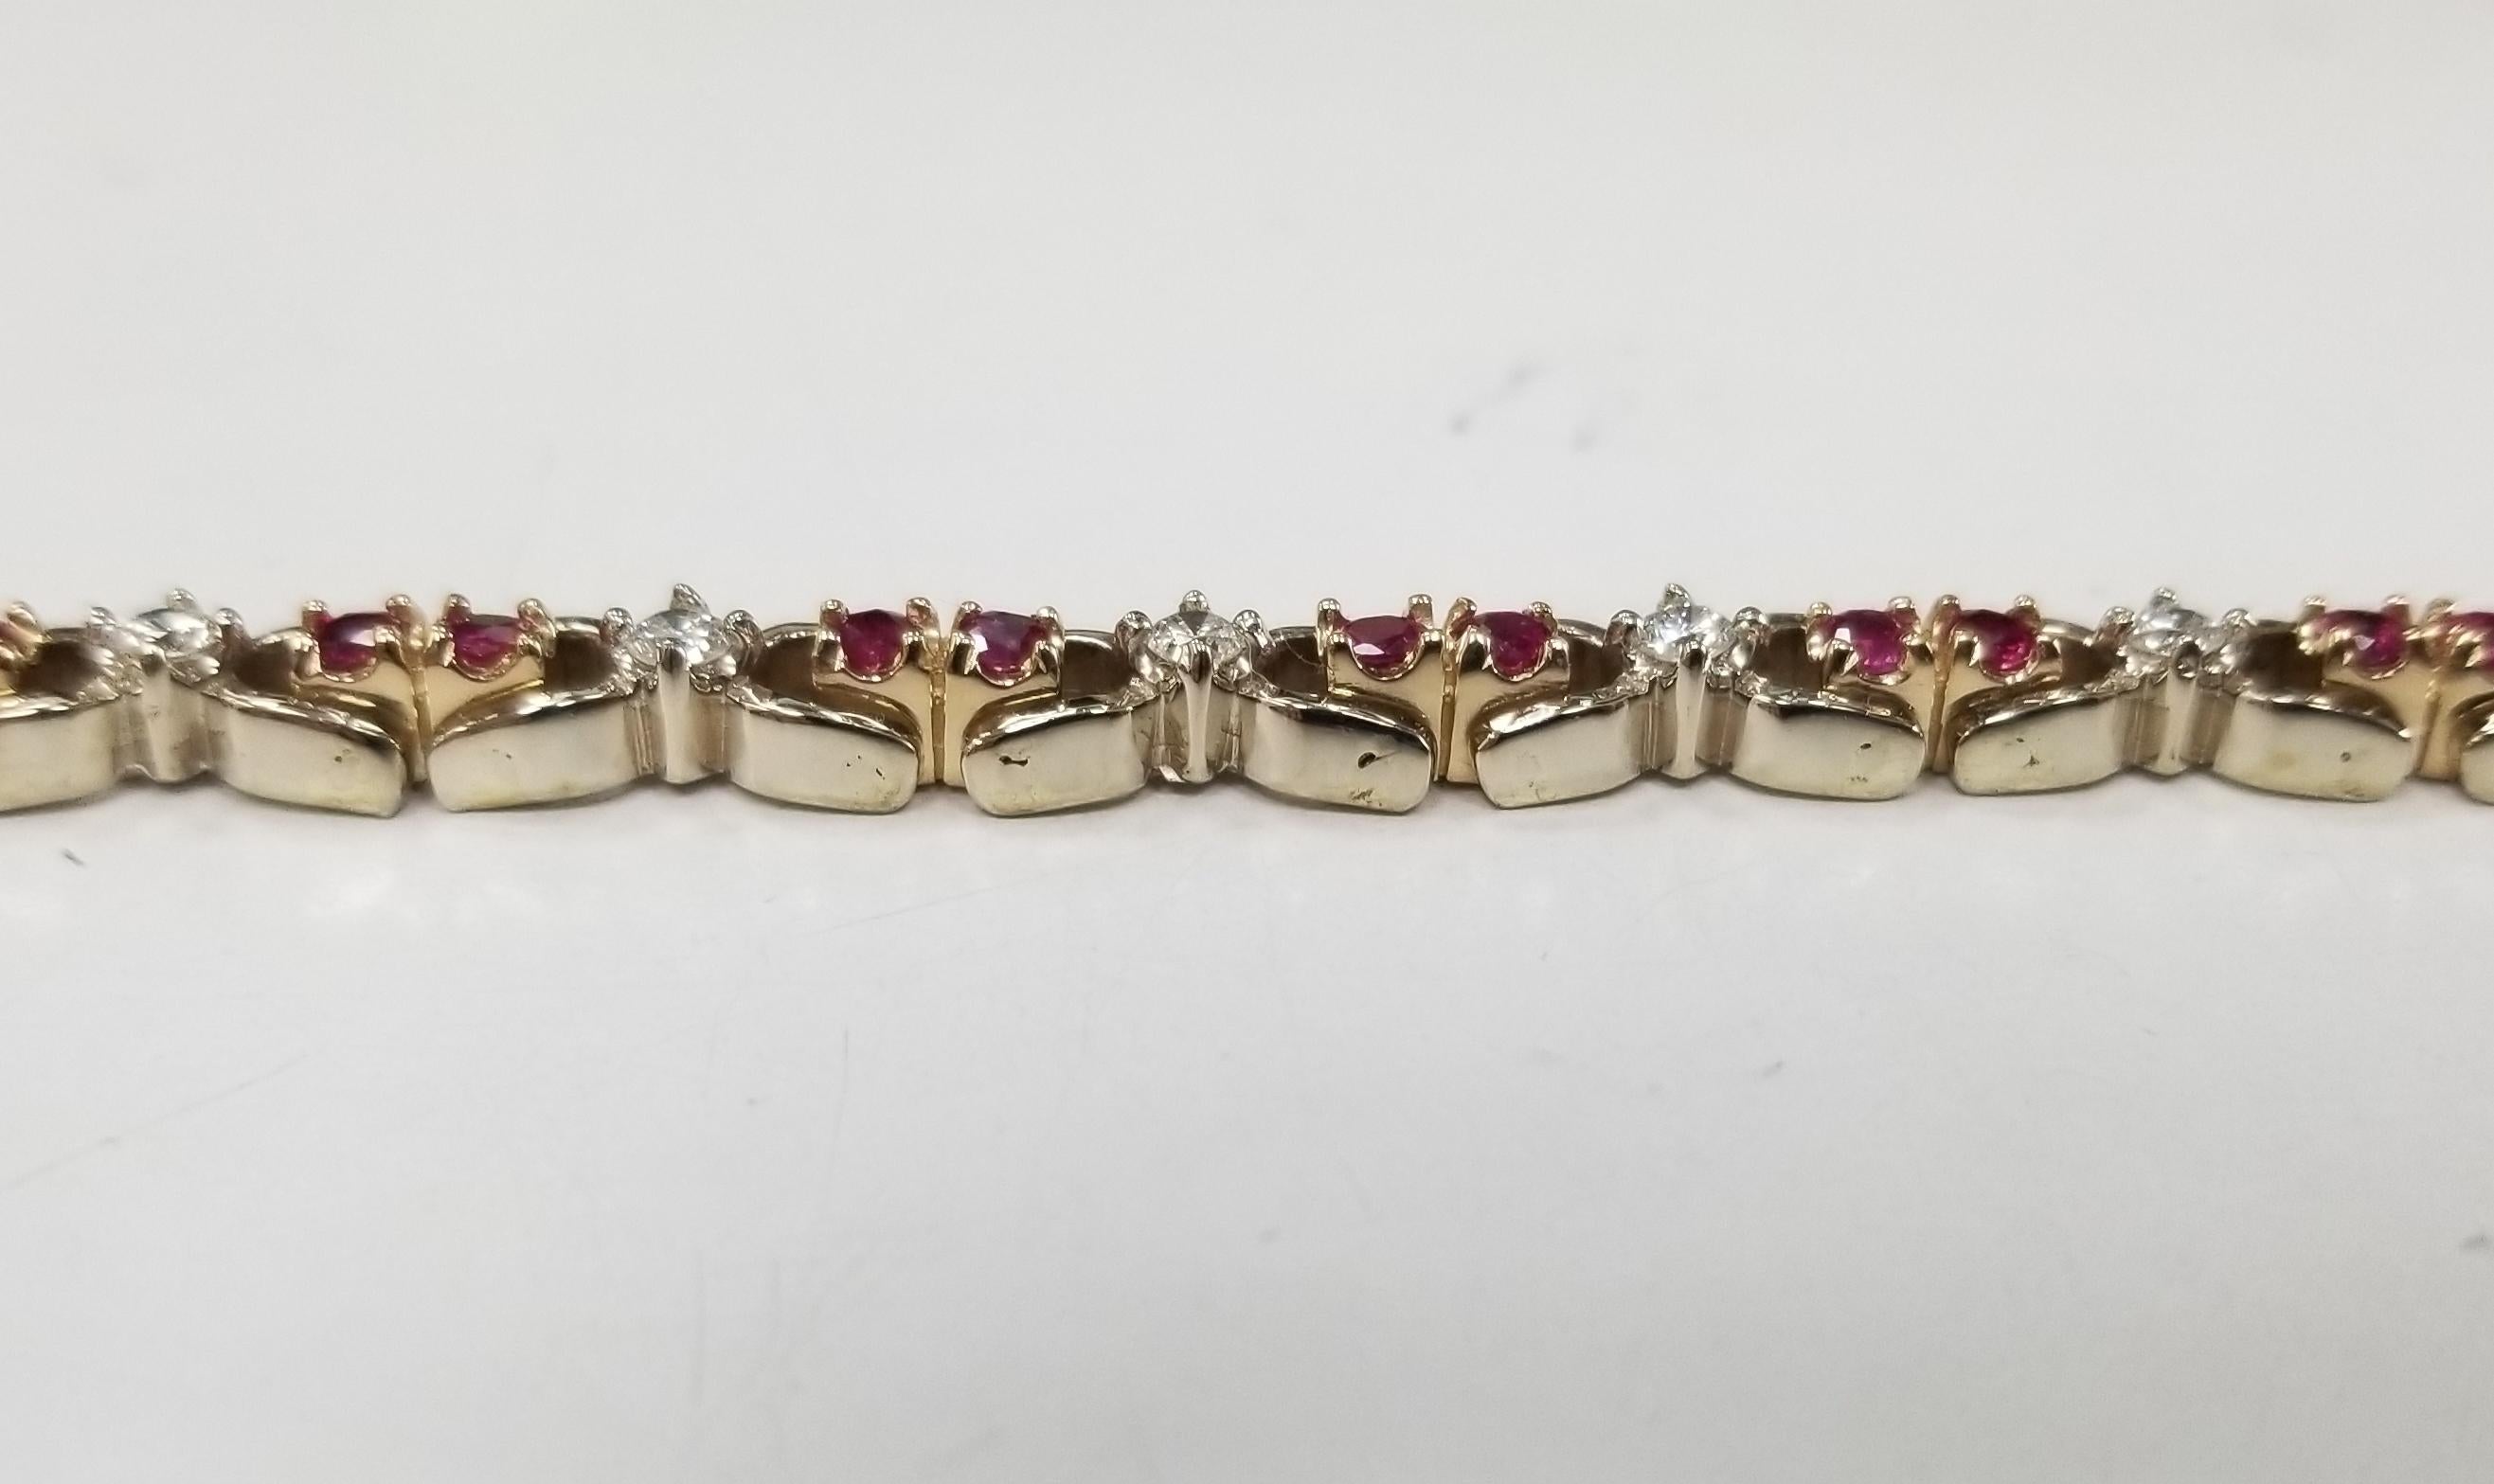 14k 2 tone gold ruby and diamond bracelet, containing 30 round rubies of gem quality weighing 2.79cts. and 15 round full cut diamonds; color 